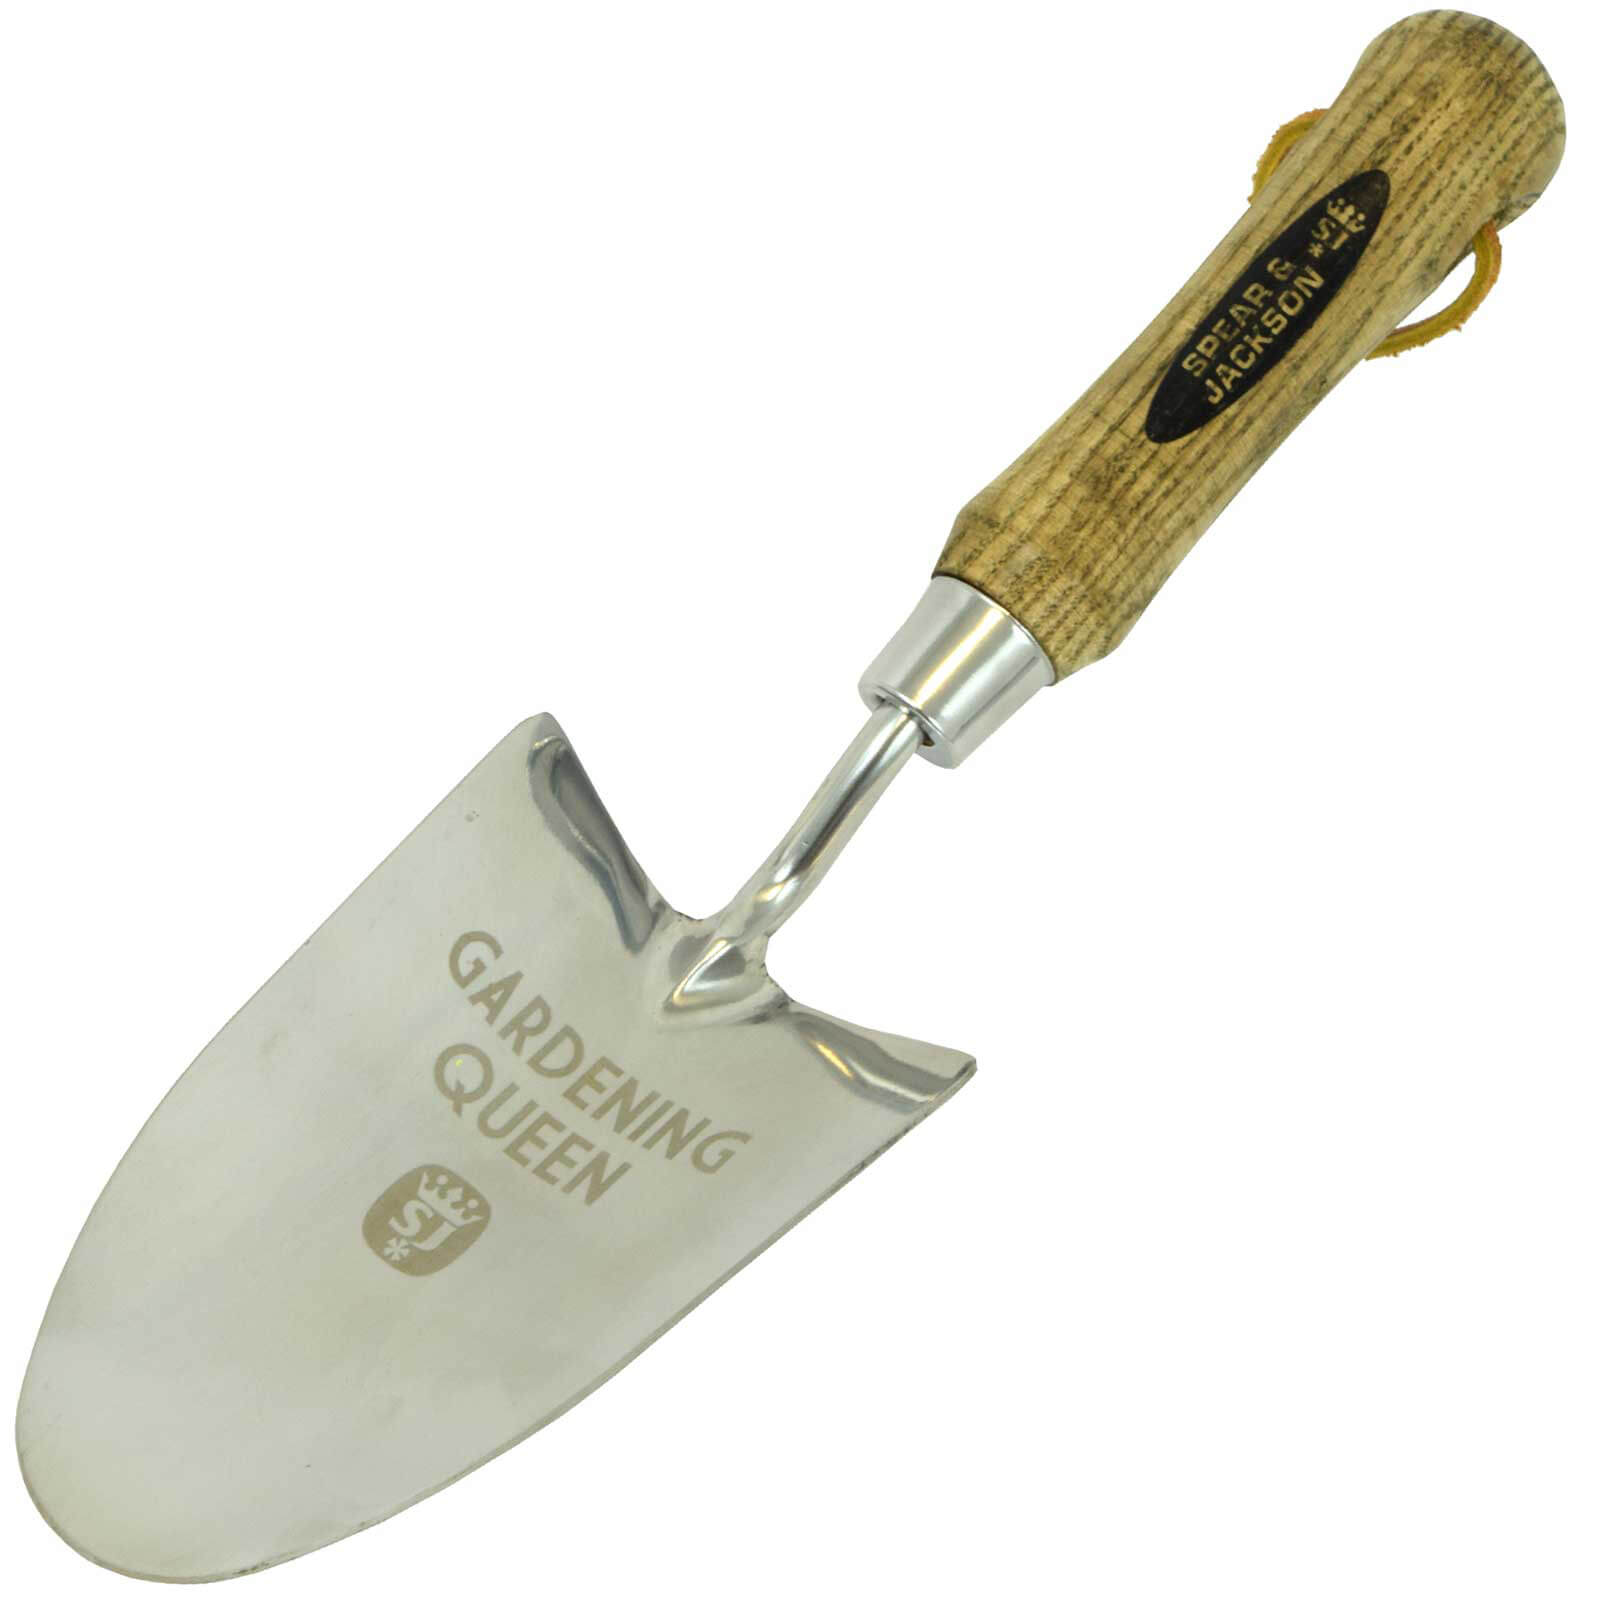 Image of Spear and Jackson Occasions Gardening Queen Etched Garden Trowel